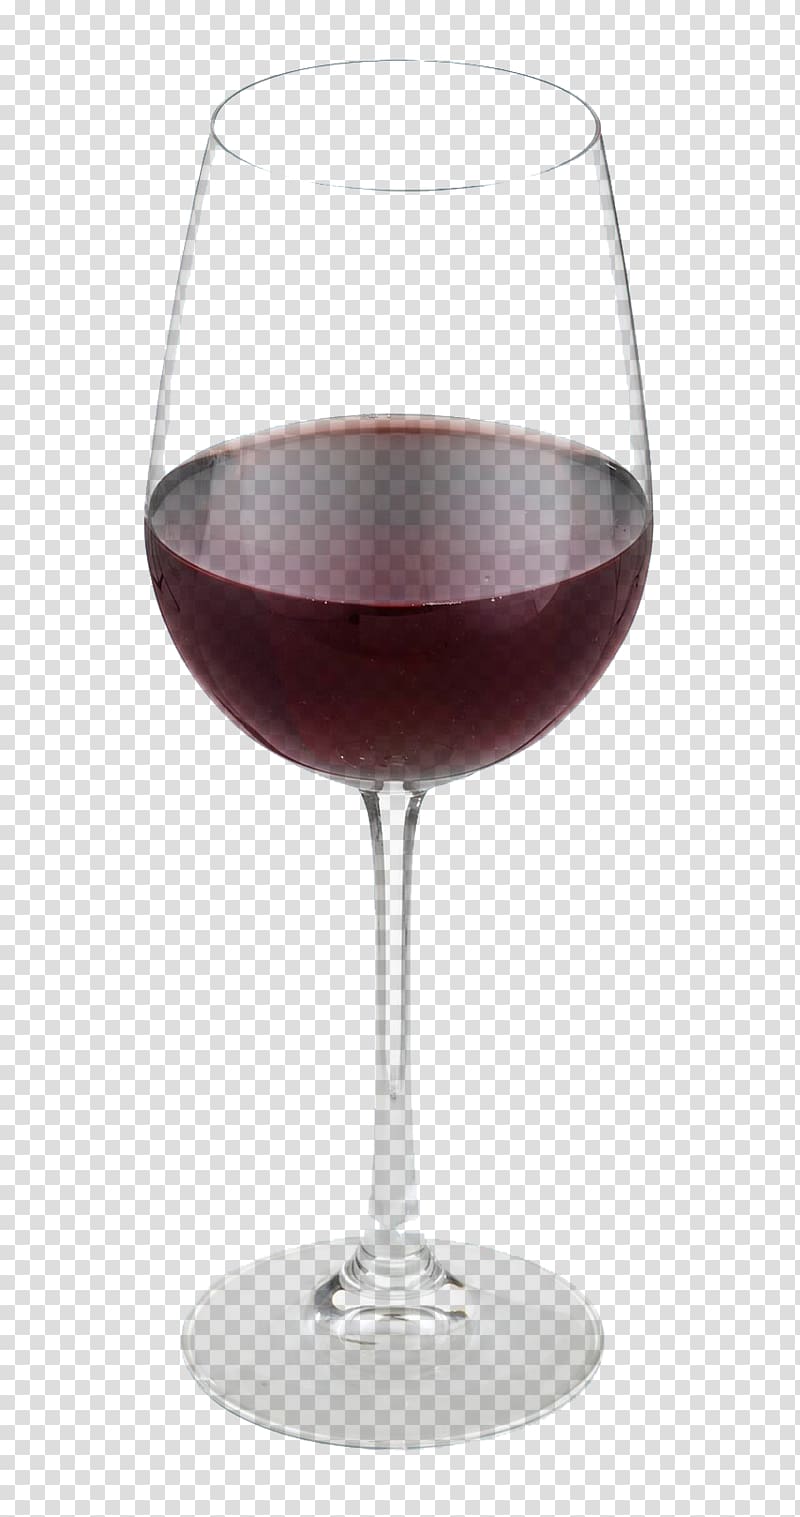 Red Wine Wine glass Restaurant l\'Amagat Beaujolais, creative wine glass transparent background PNG clipart